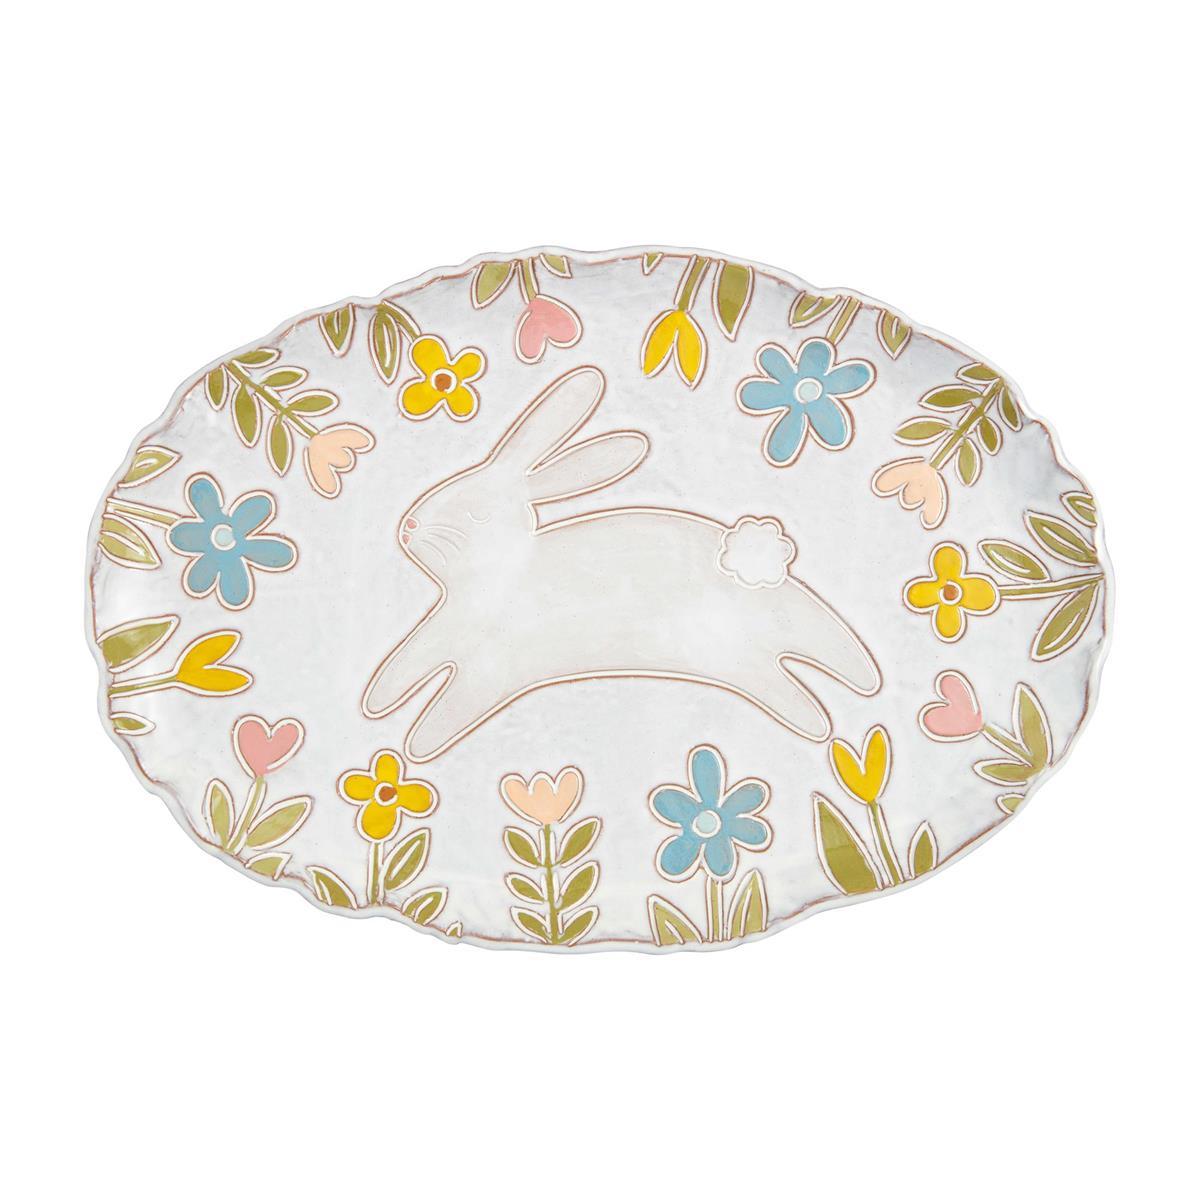 white oval platter with bunny and floral pattern.